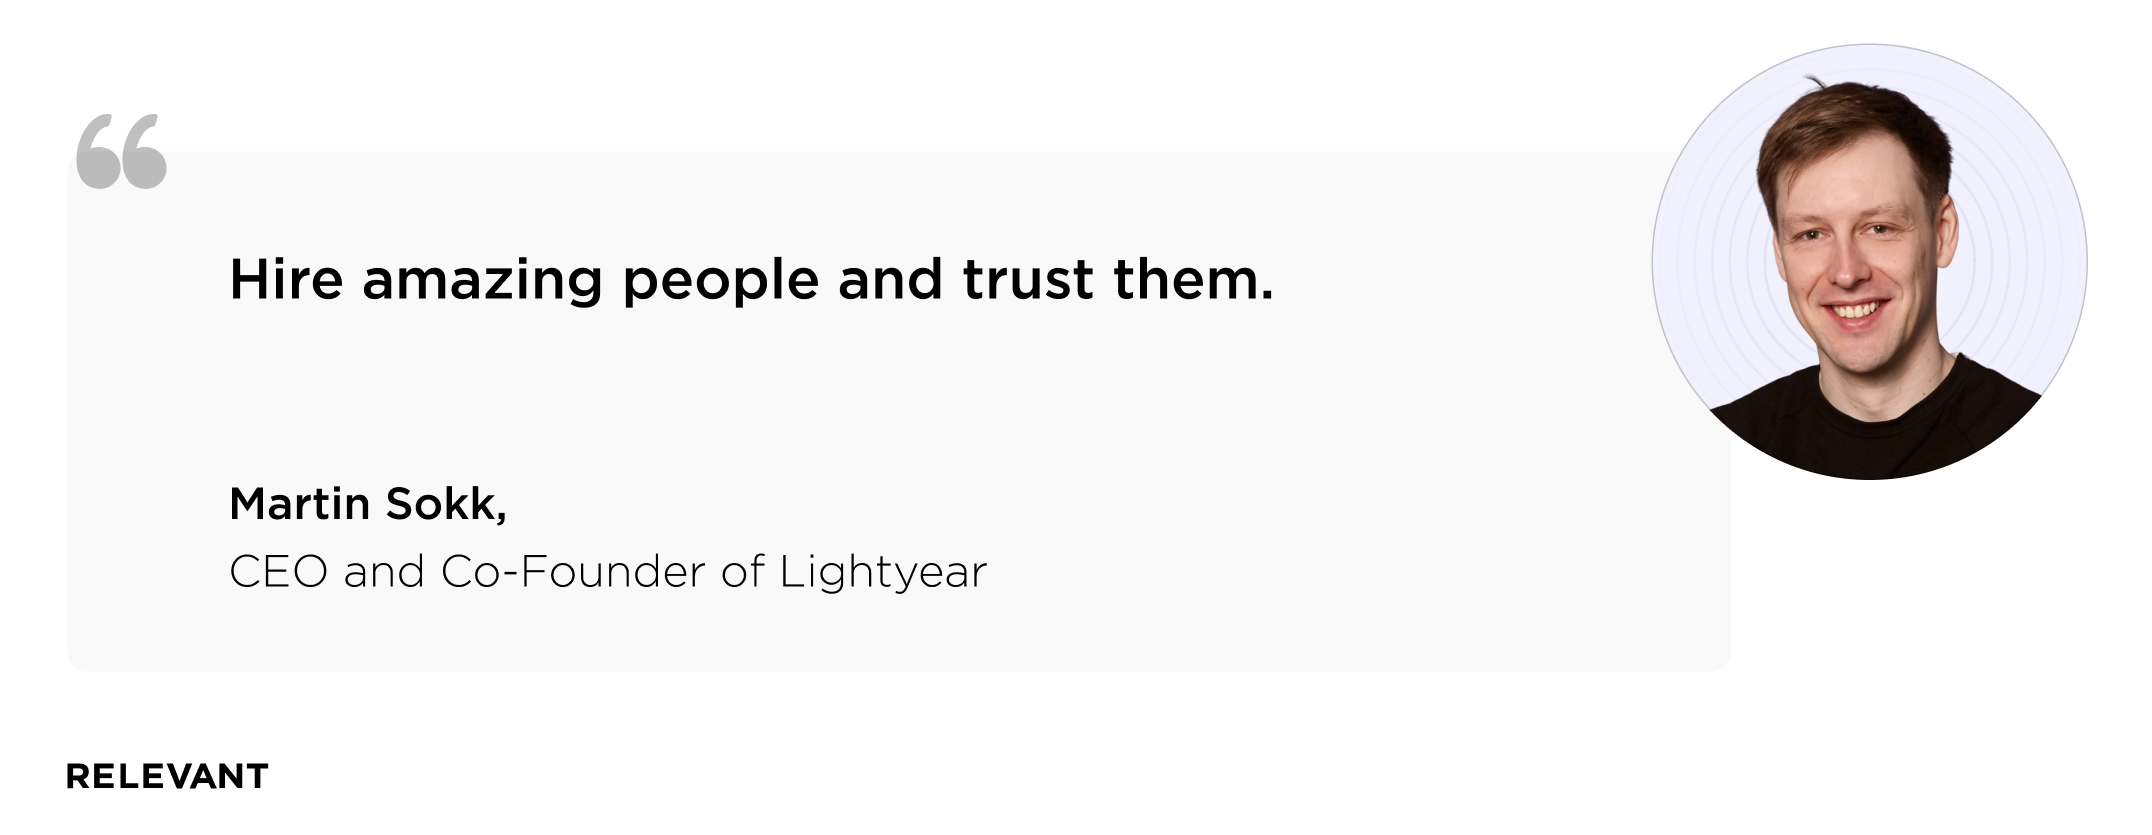 “Hire amazing people and trust them.” Martin Sokk, CEO and co-founder of  Lightyear